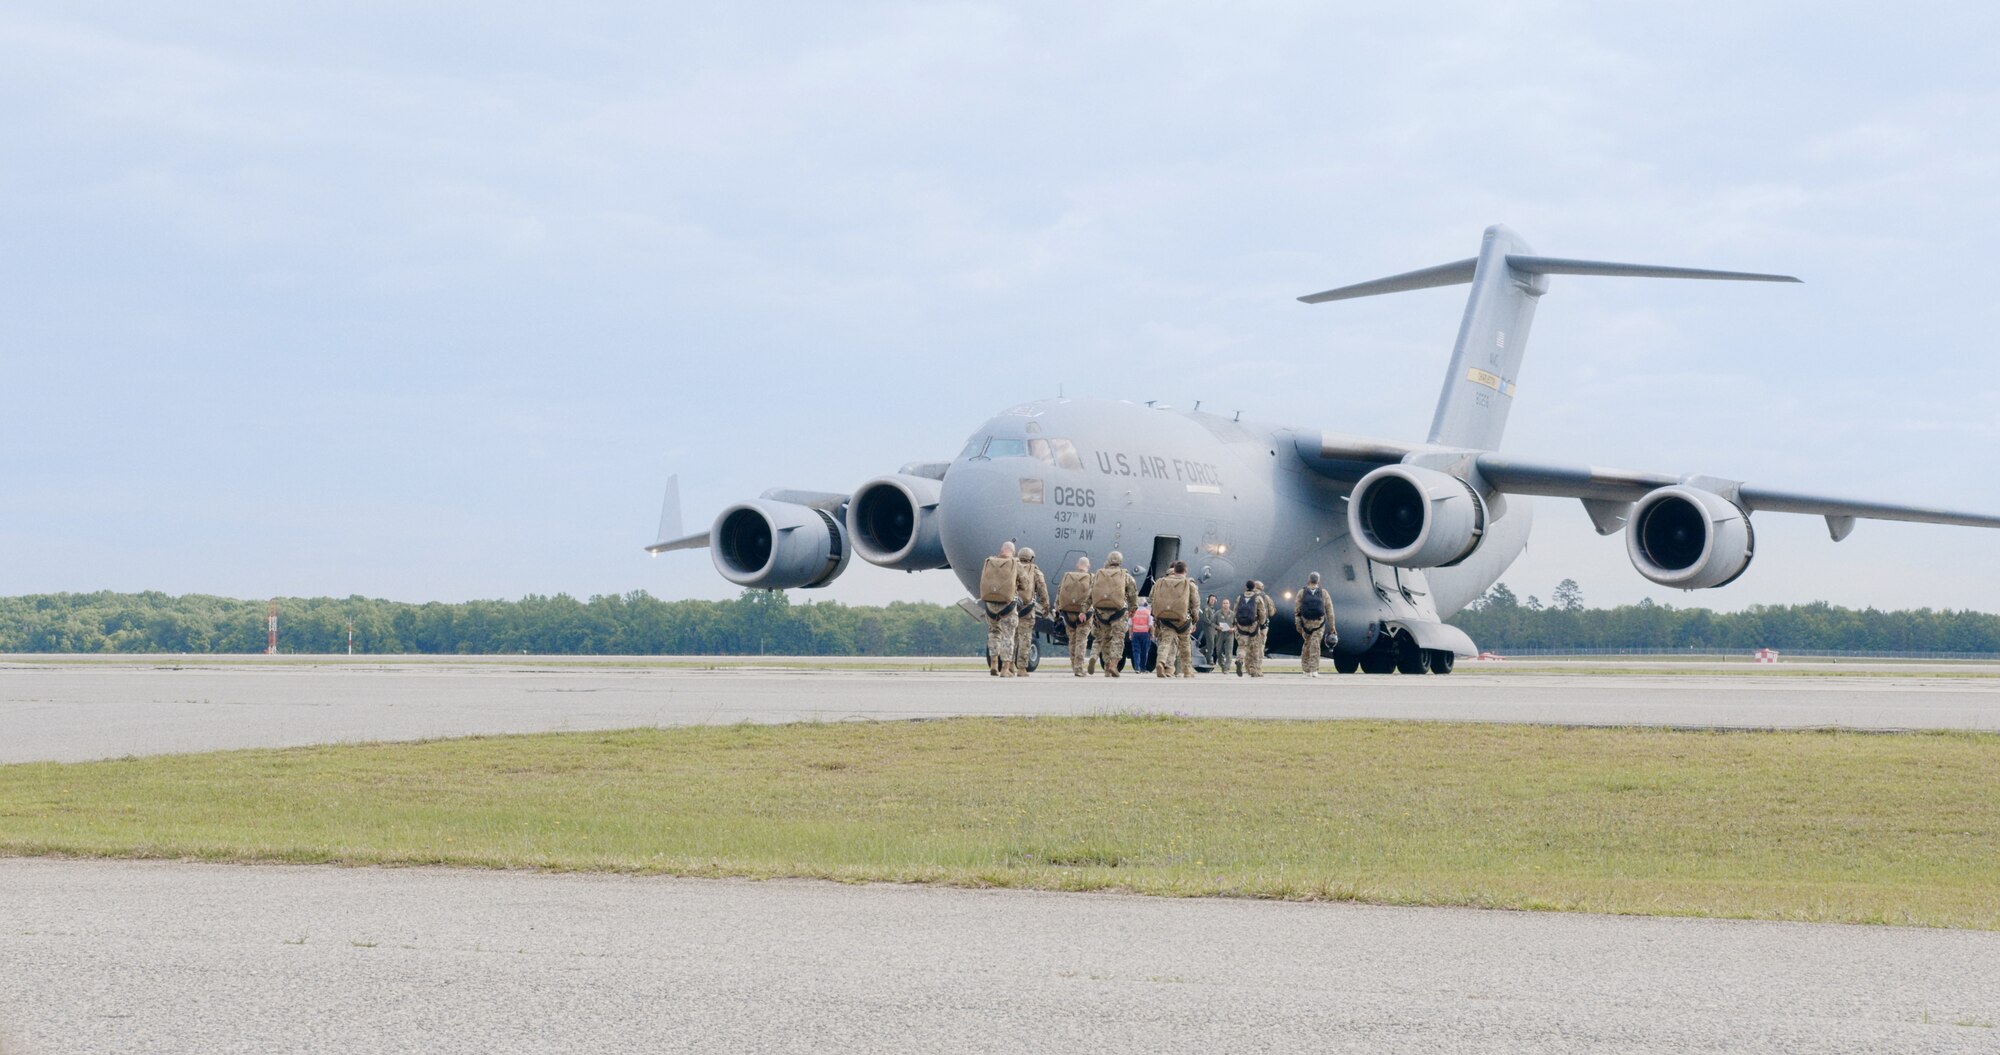 Survival, evasion, resistance and escape specialists, pararescue jumpers and Army jumpmasters board a C-17 for a joint readiness exercise at Robins Air Force Base, Georgia, May 11. (U.S. Air Force photo by Jacob Keenum)